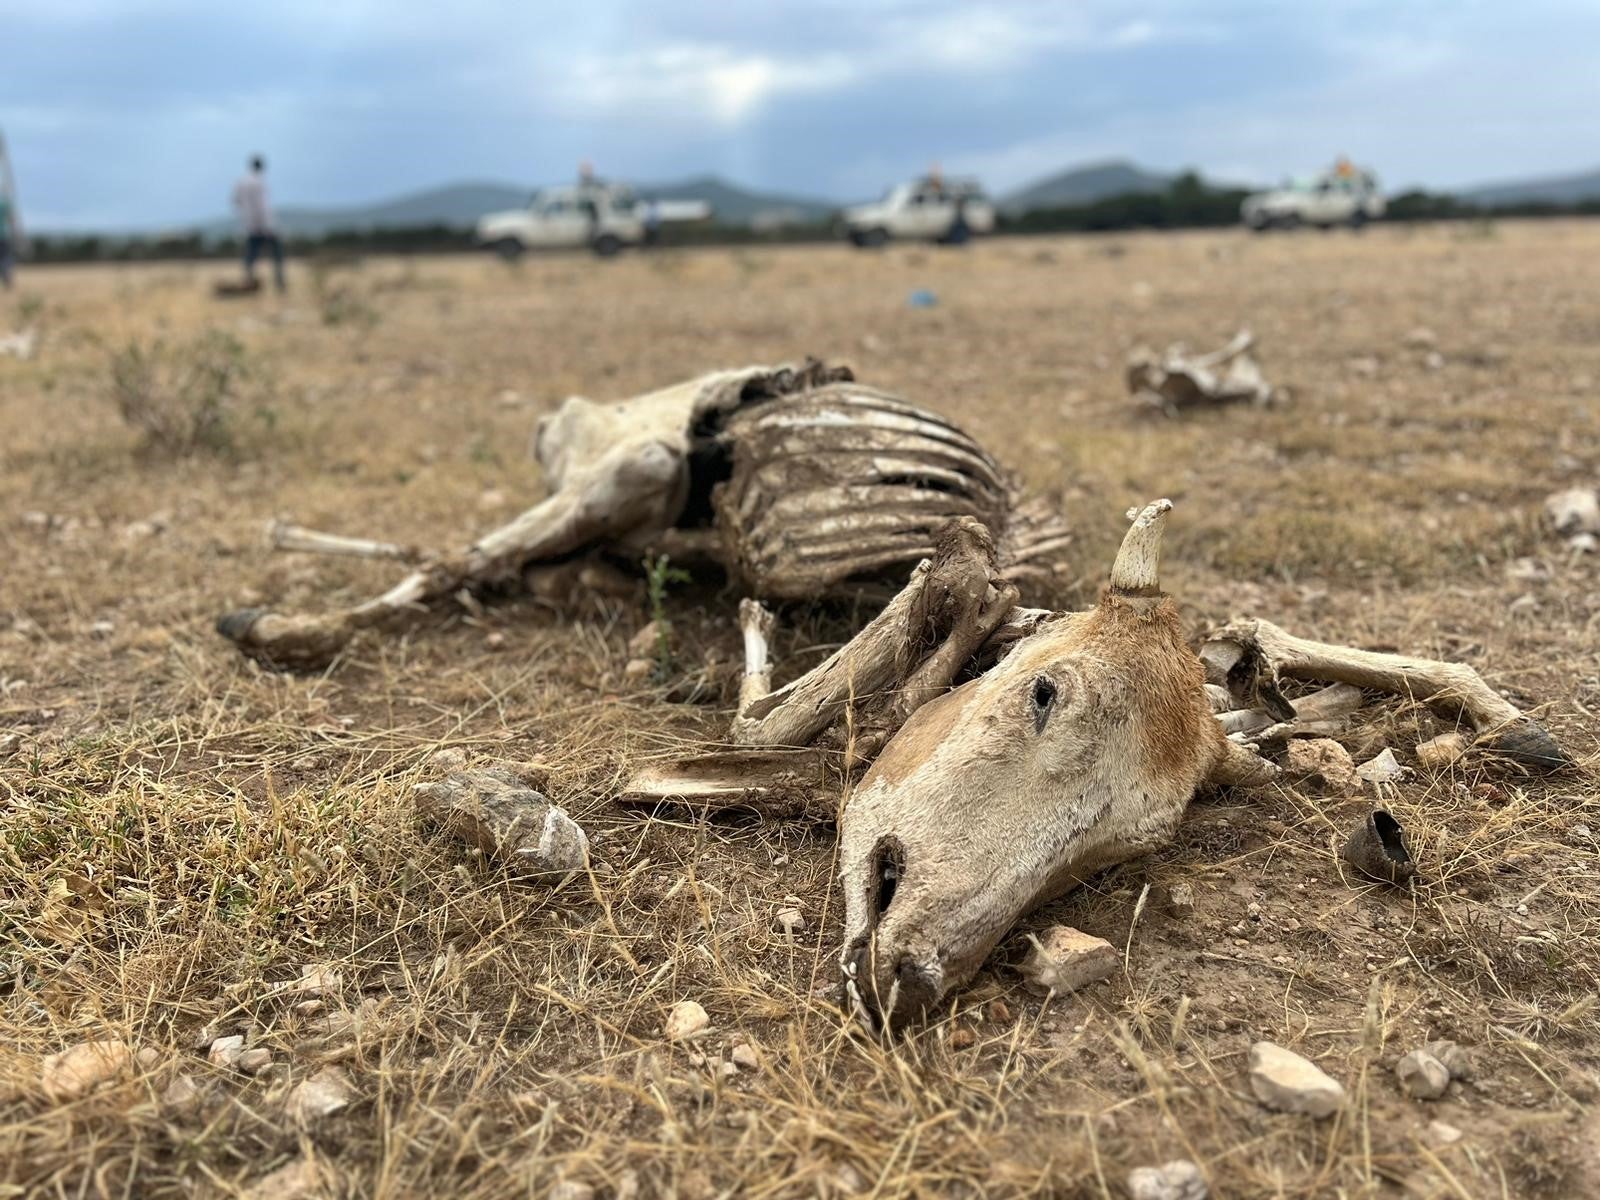 Cattle are dying as Ethiopia experiences its worst drought in 40 years